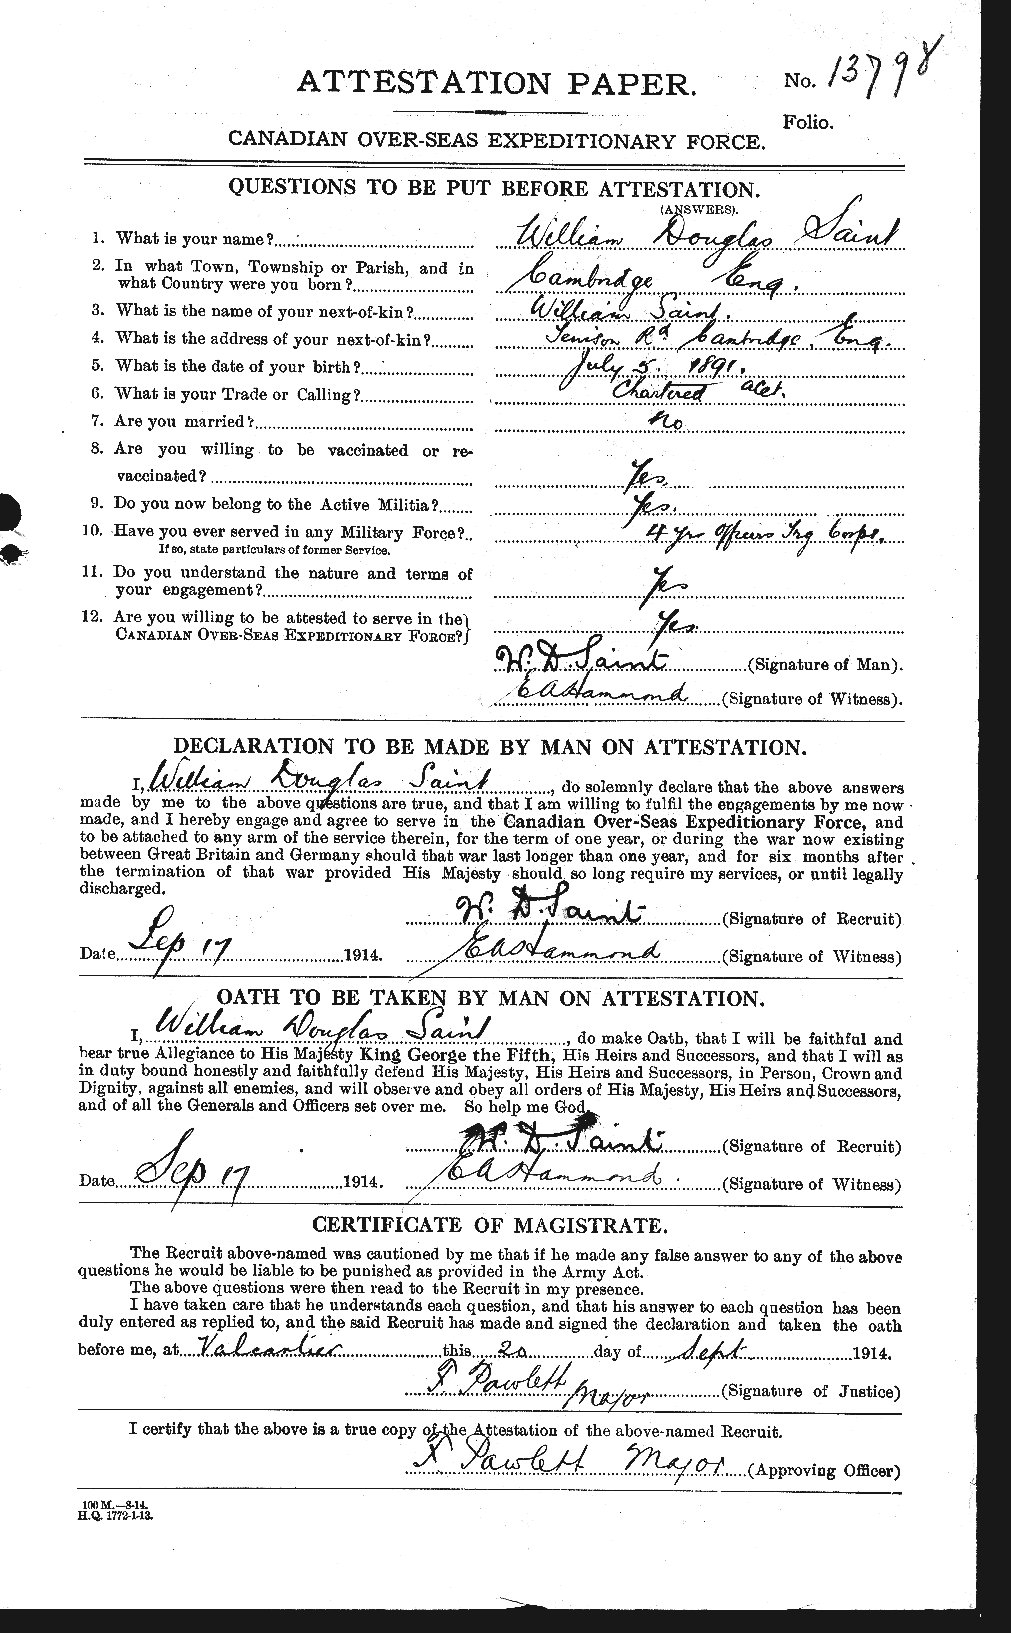 Personnel Records of the First World War - CEF 077236a